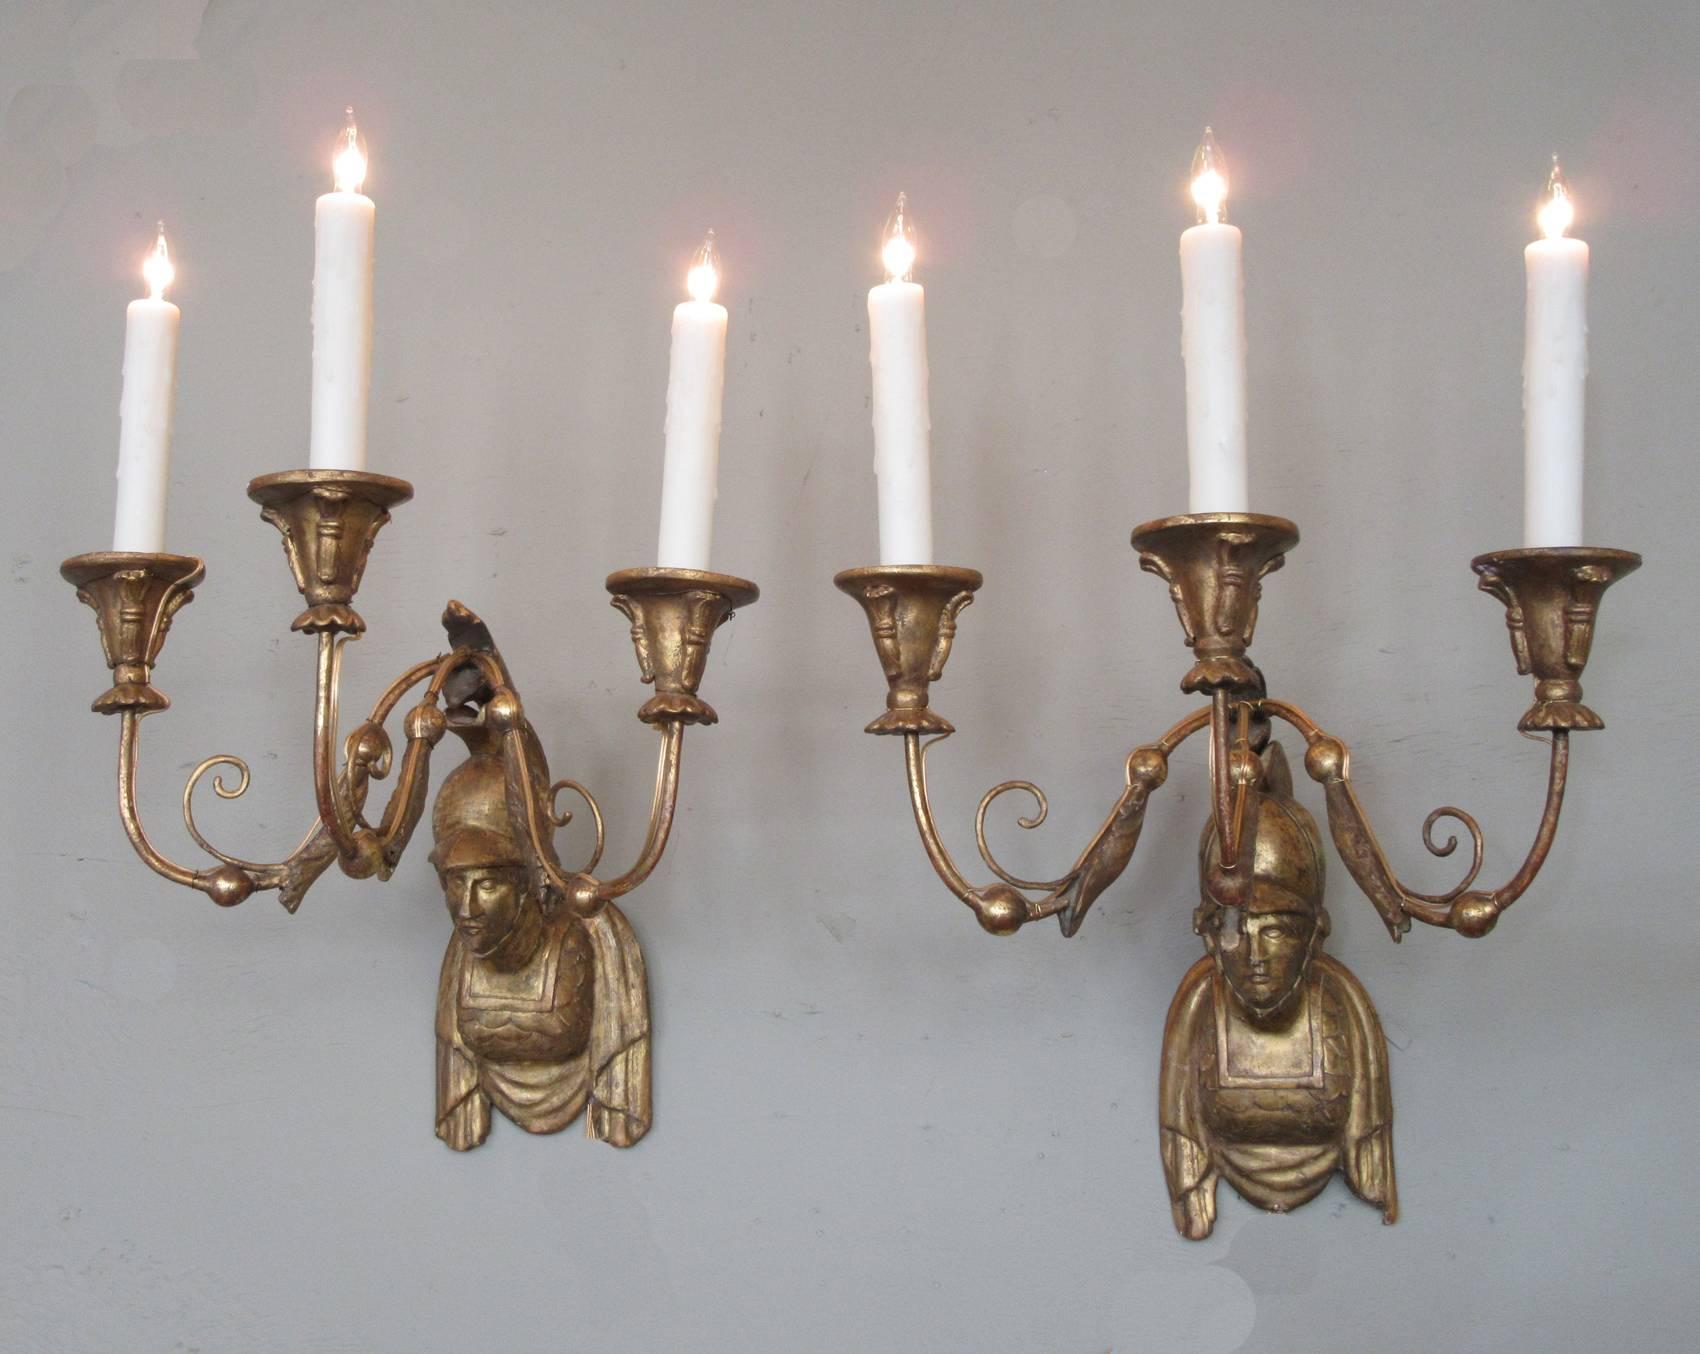 Early 19th Century Italian Neoclassical Giltwood Sconces with Roman Soldier Bust For Sale 5